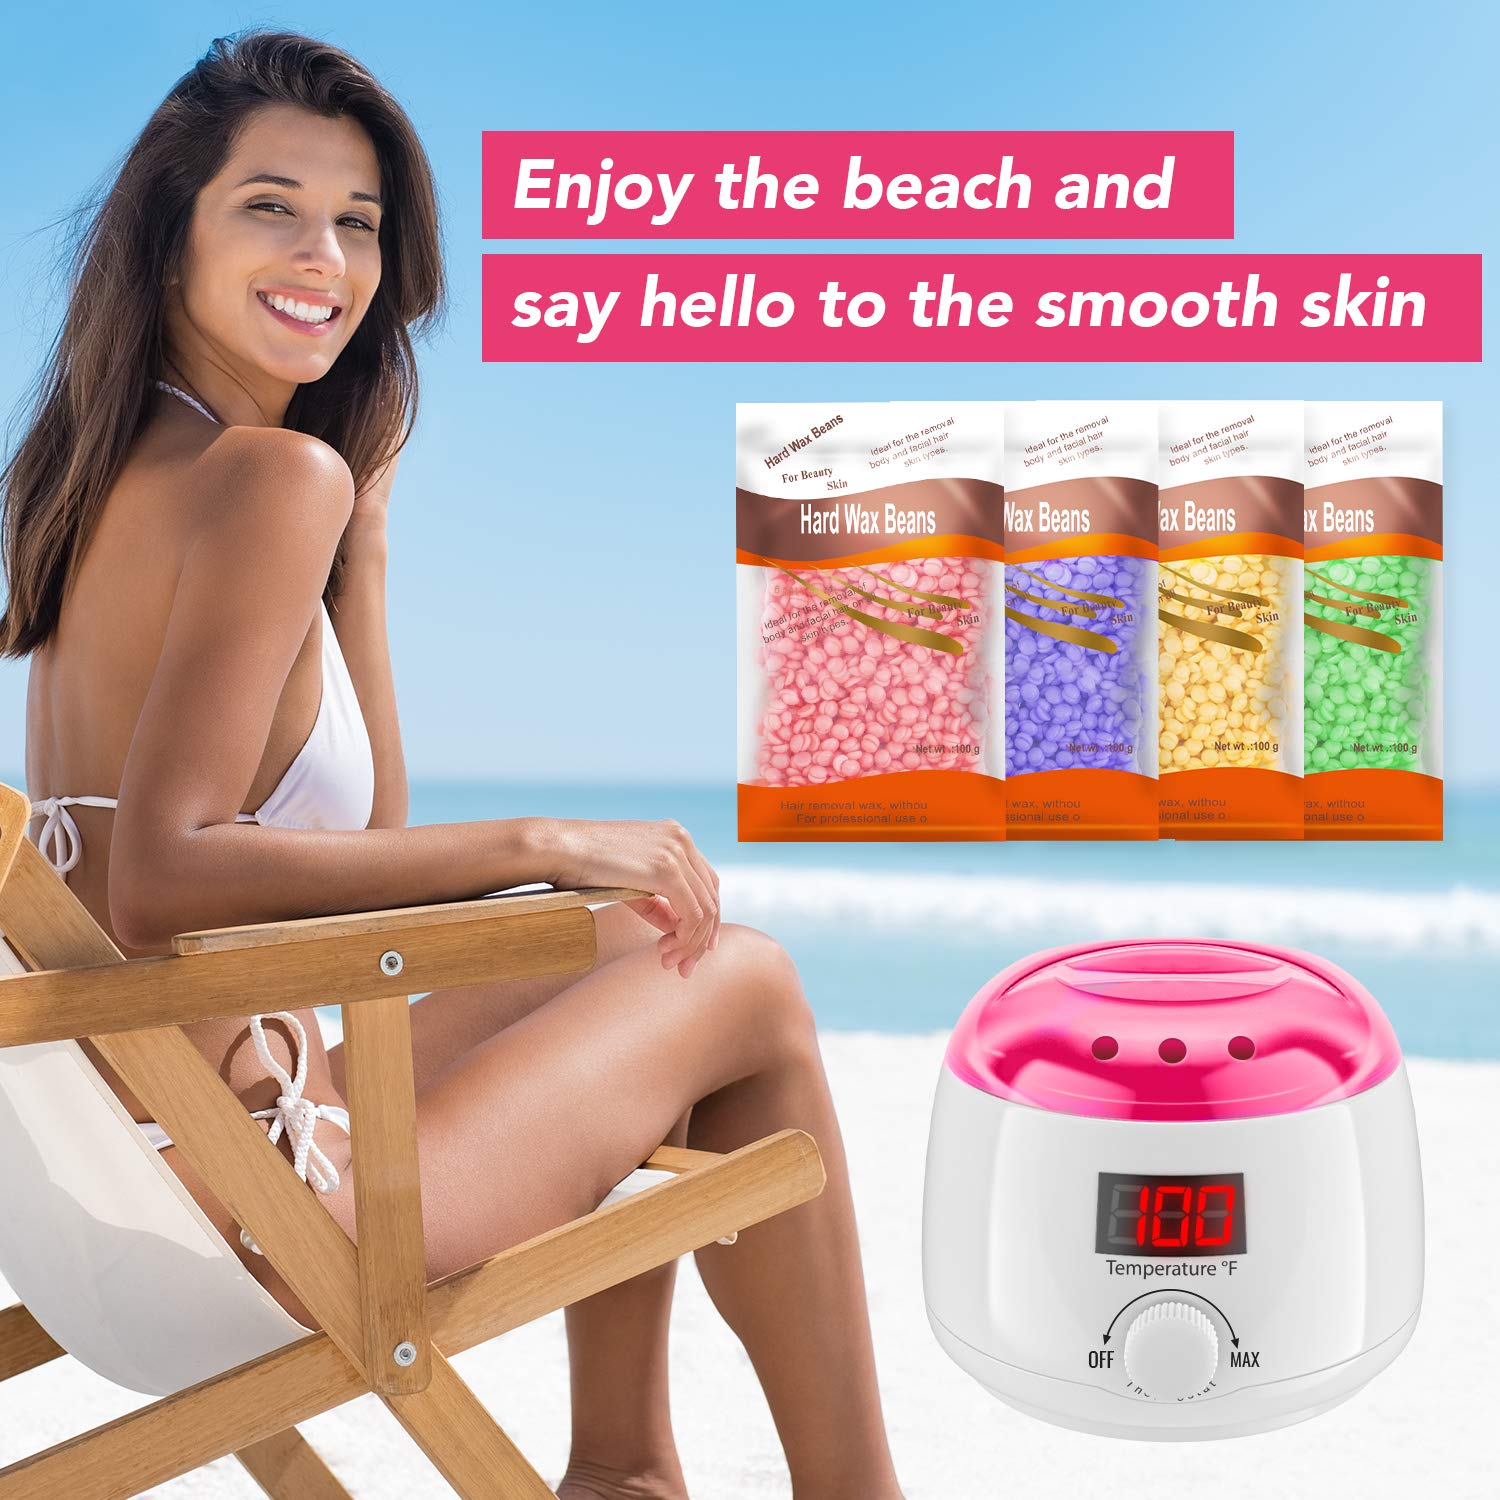  Professional Electric Wax Warmer and Heater for Soft